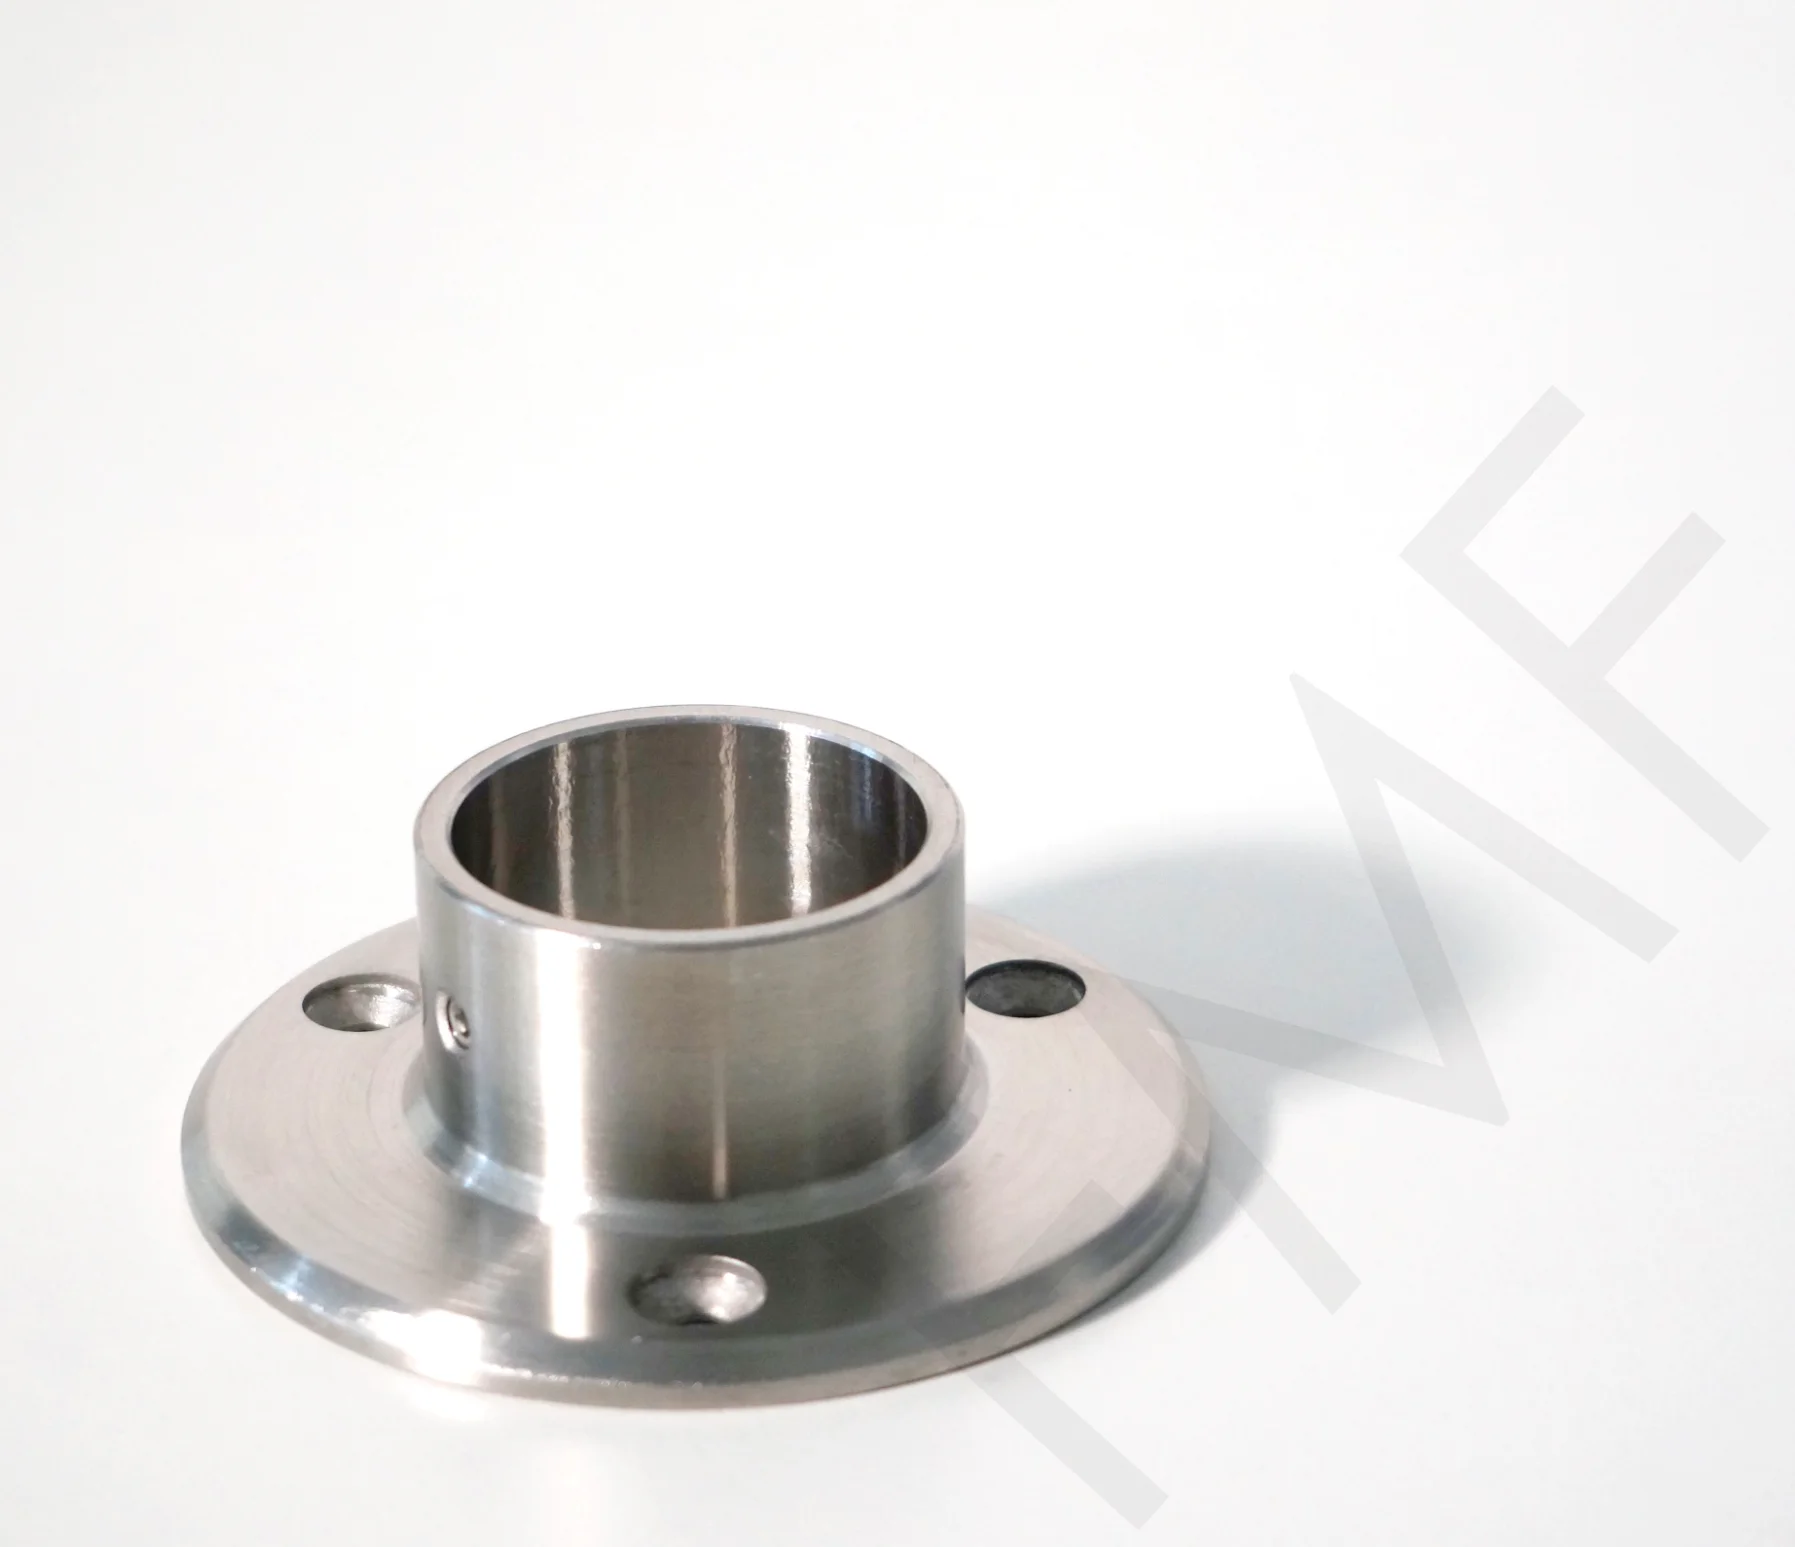 Flange Disc for Round Handrail